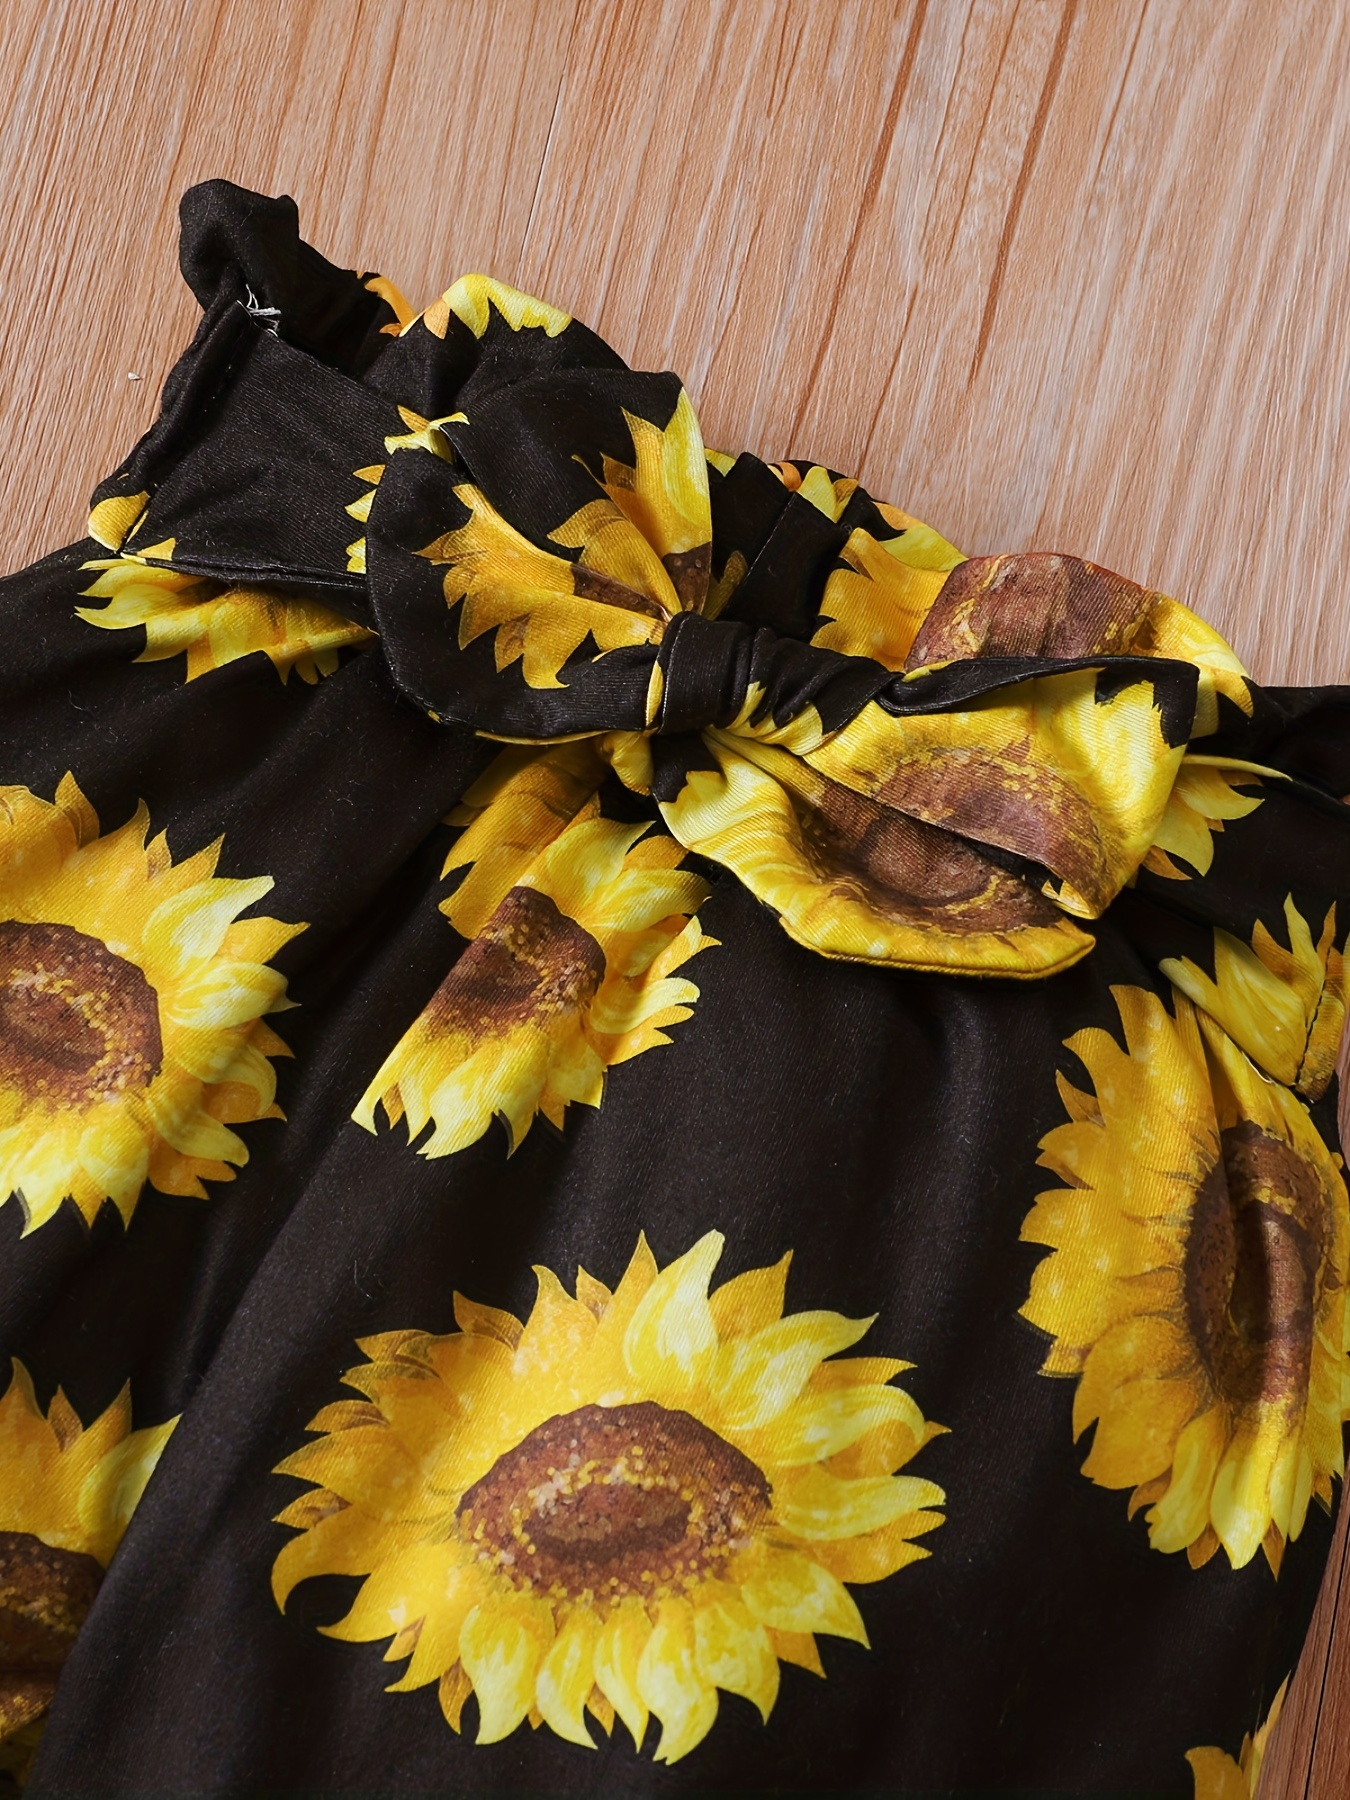 Sunflower Trousers